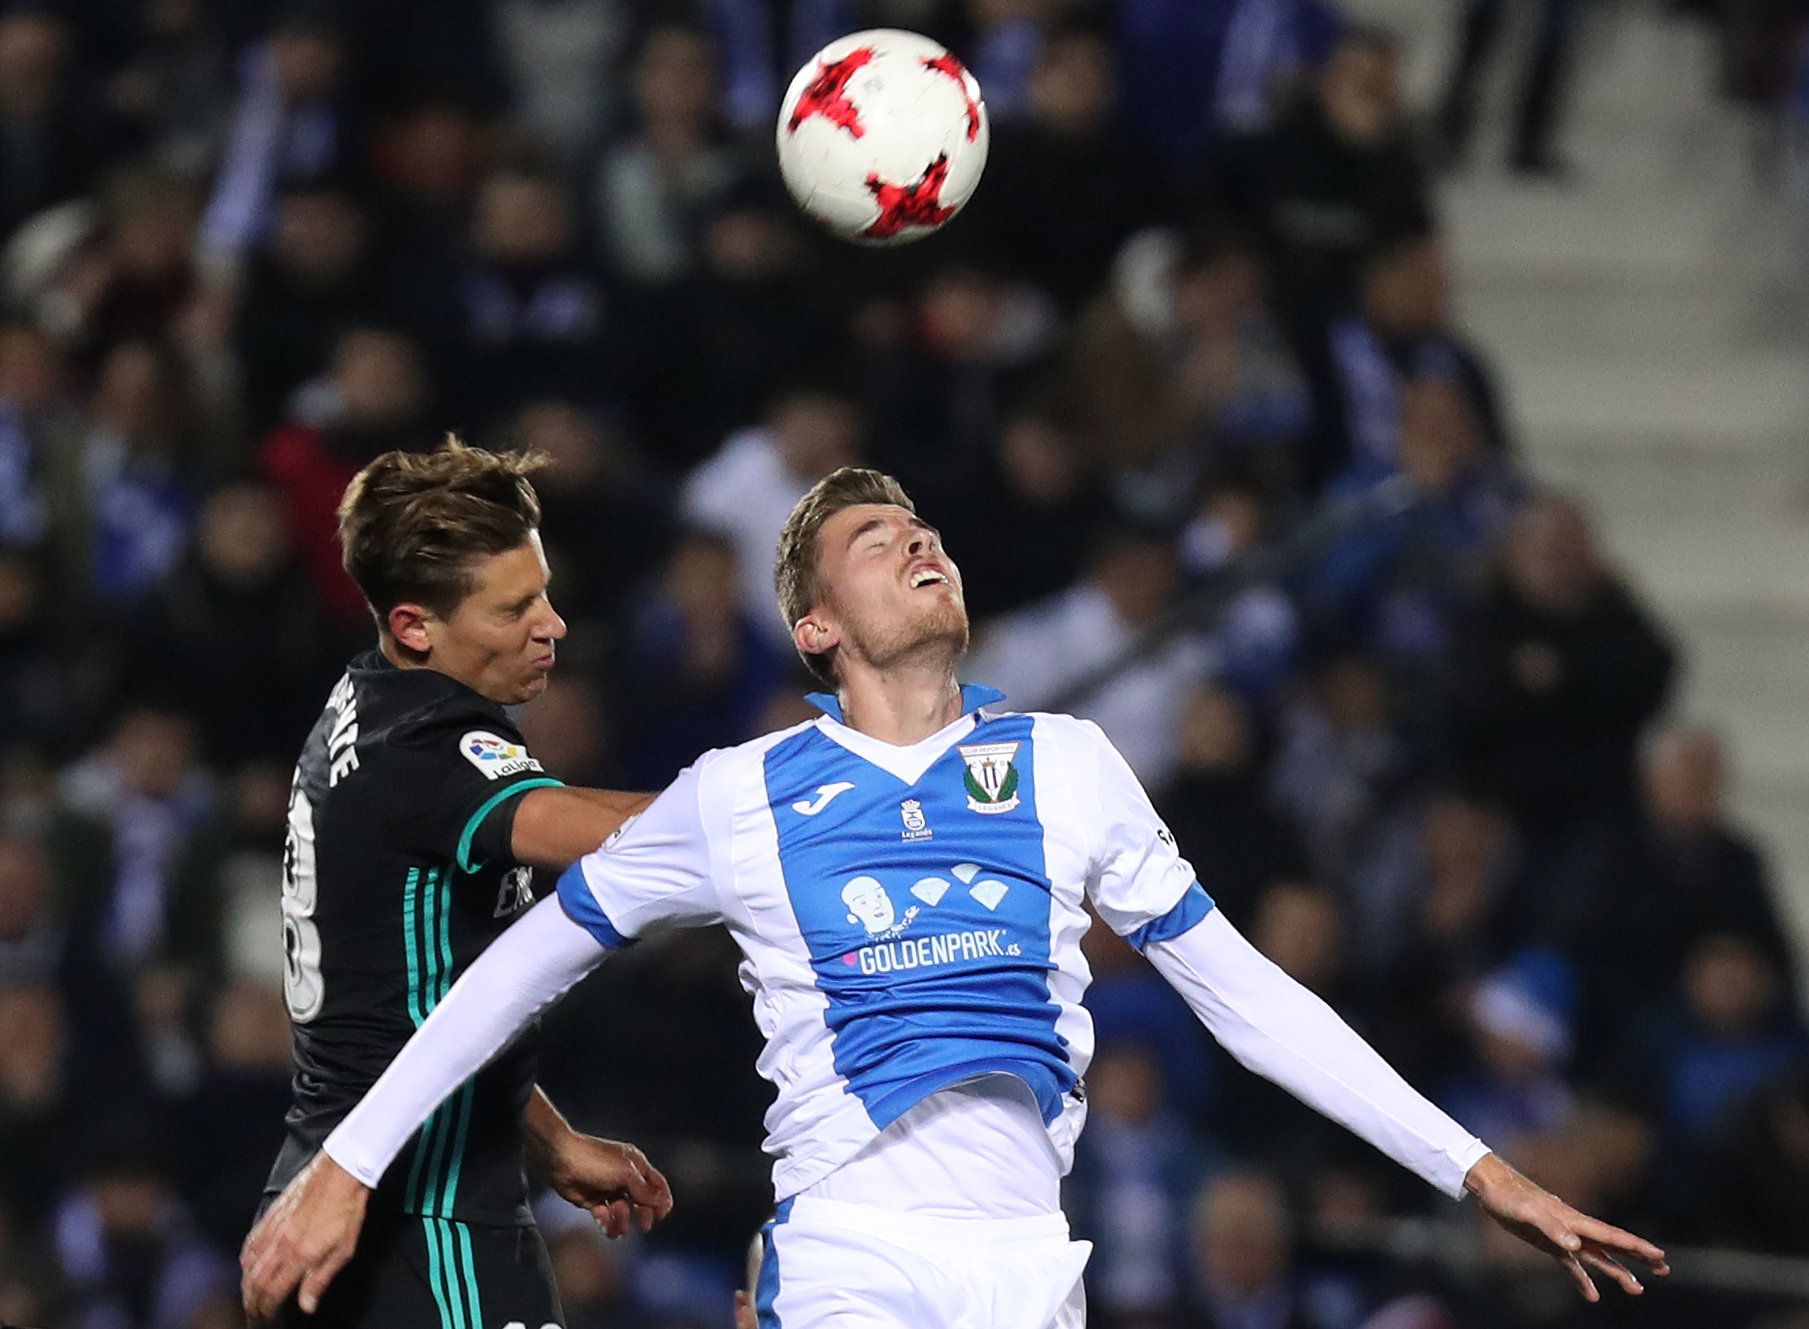 Soccer Football - Spanish King's Cup - Leganes vs Real Madrid - Quarter-Final - First Leg - Butarque Municipal Stadium, Leganes, Spain - January 18, 2018   Real Madrid’s Marcos Llorente in action with Leganes’ Gerard Gumbau     REUTERS/Susana Vera